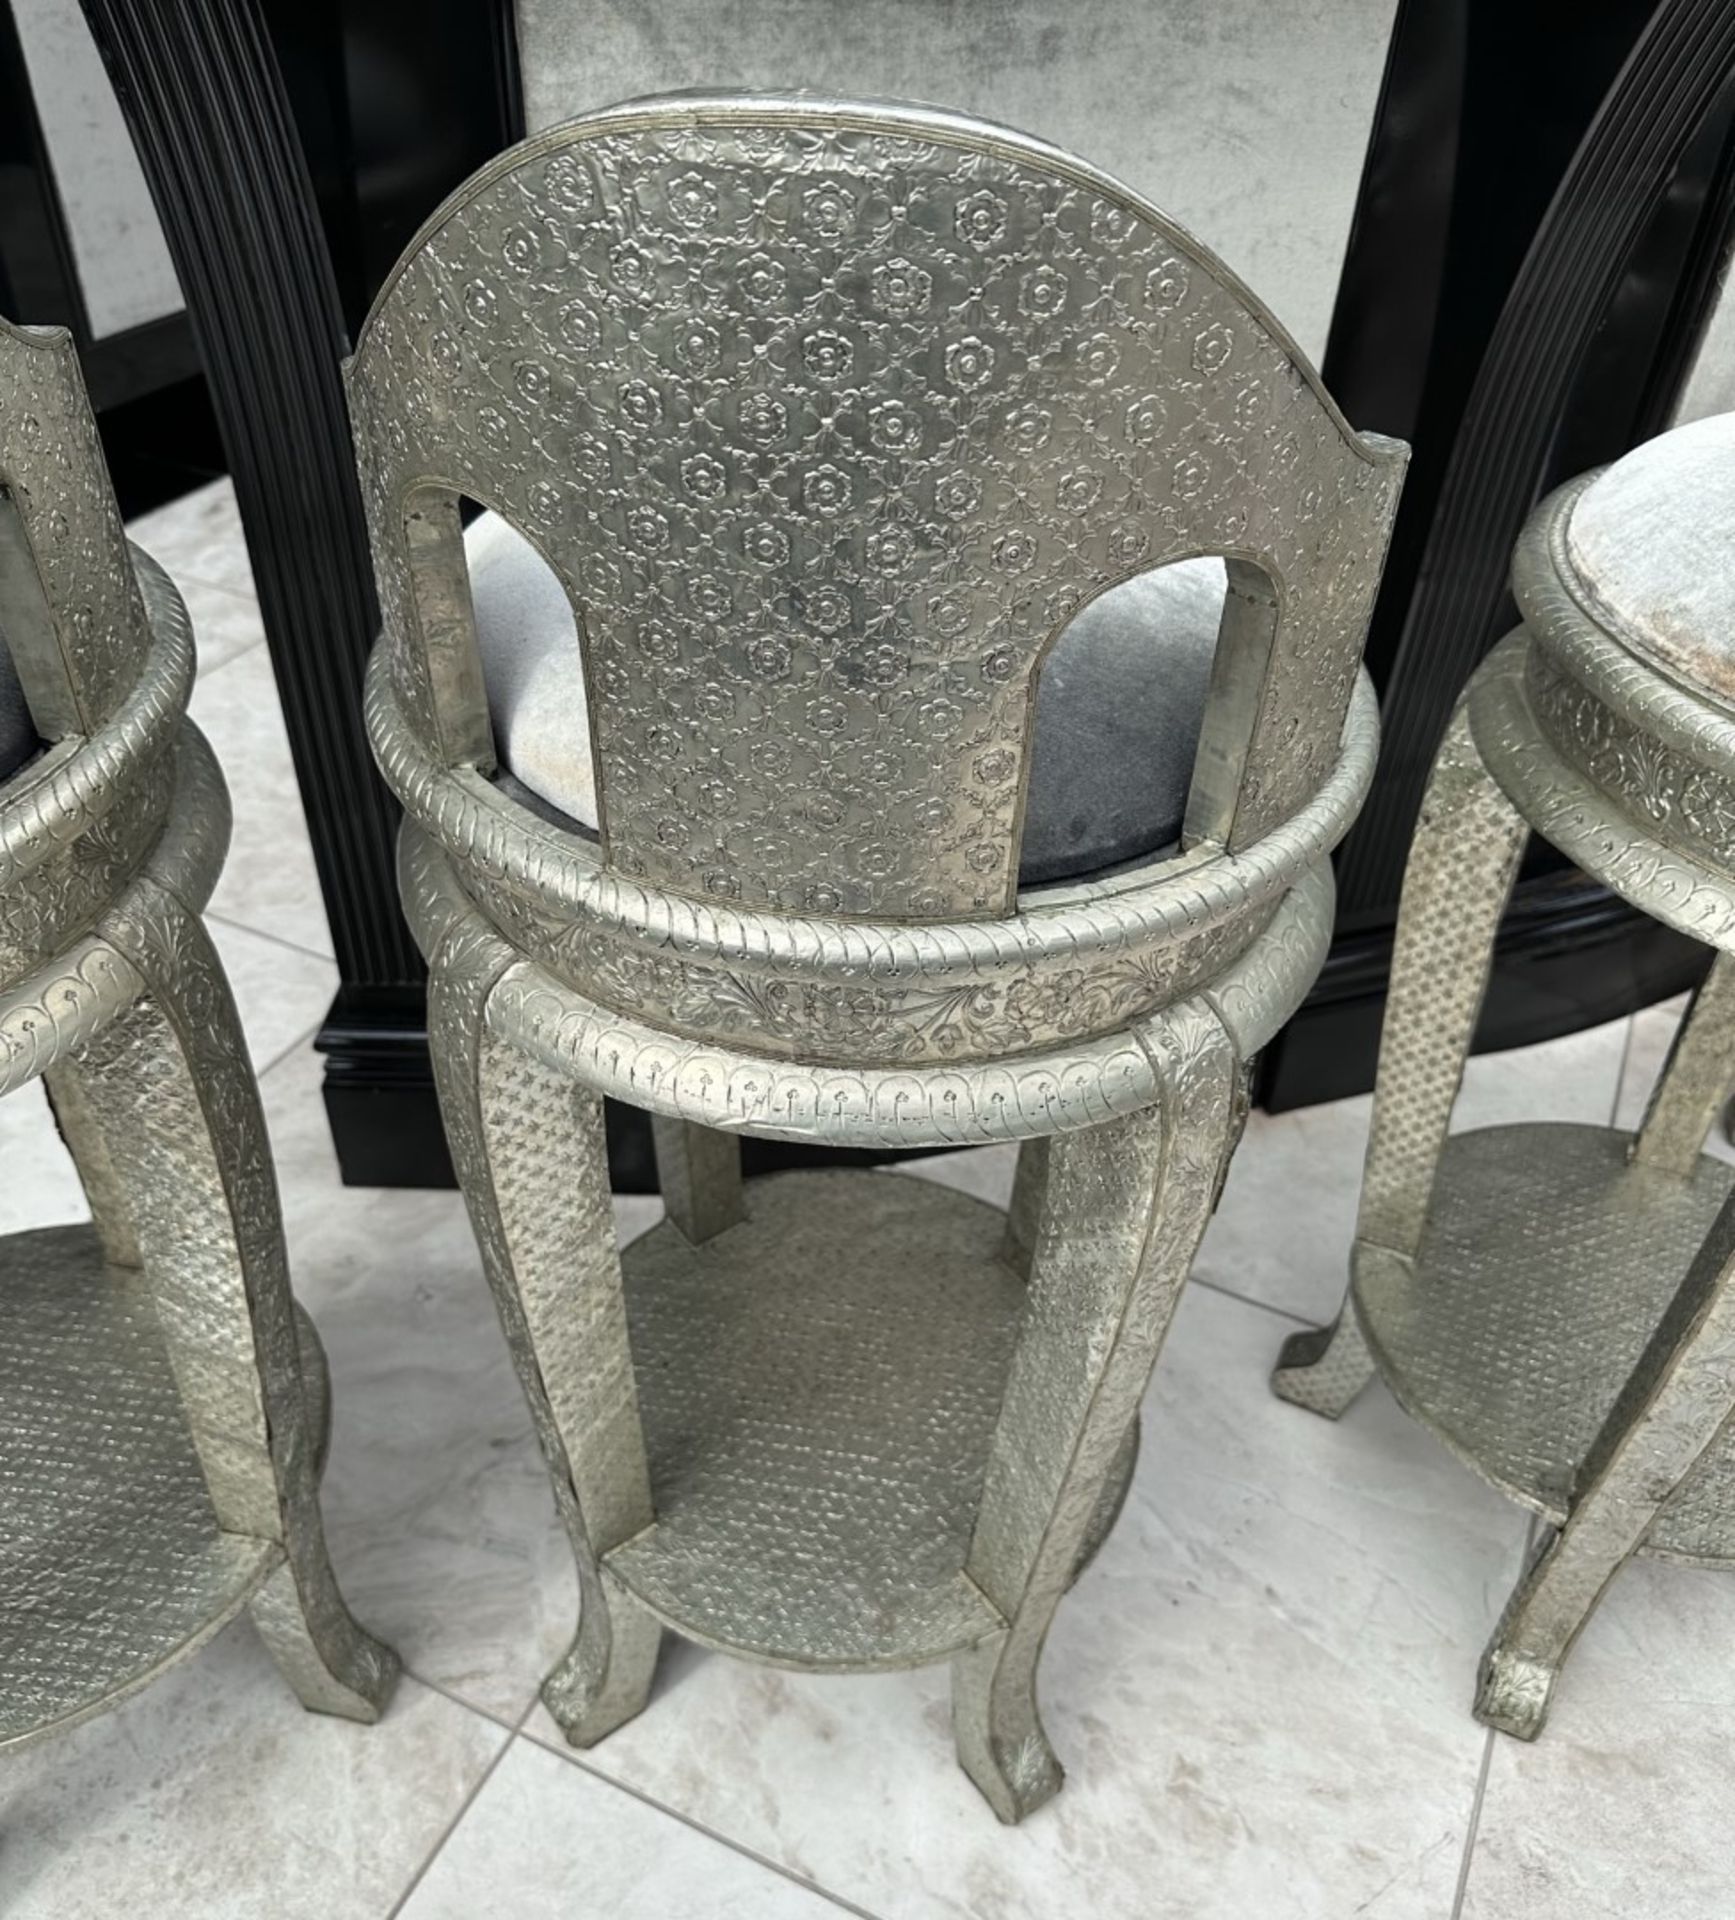 6 x Ornate Silver Tone Bar Stools With Grey Velvet Seat Pads - Image 10 of 16